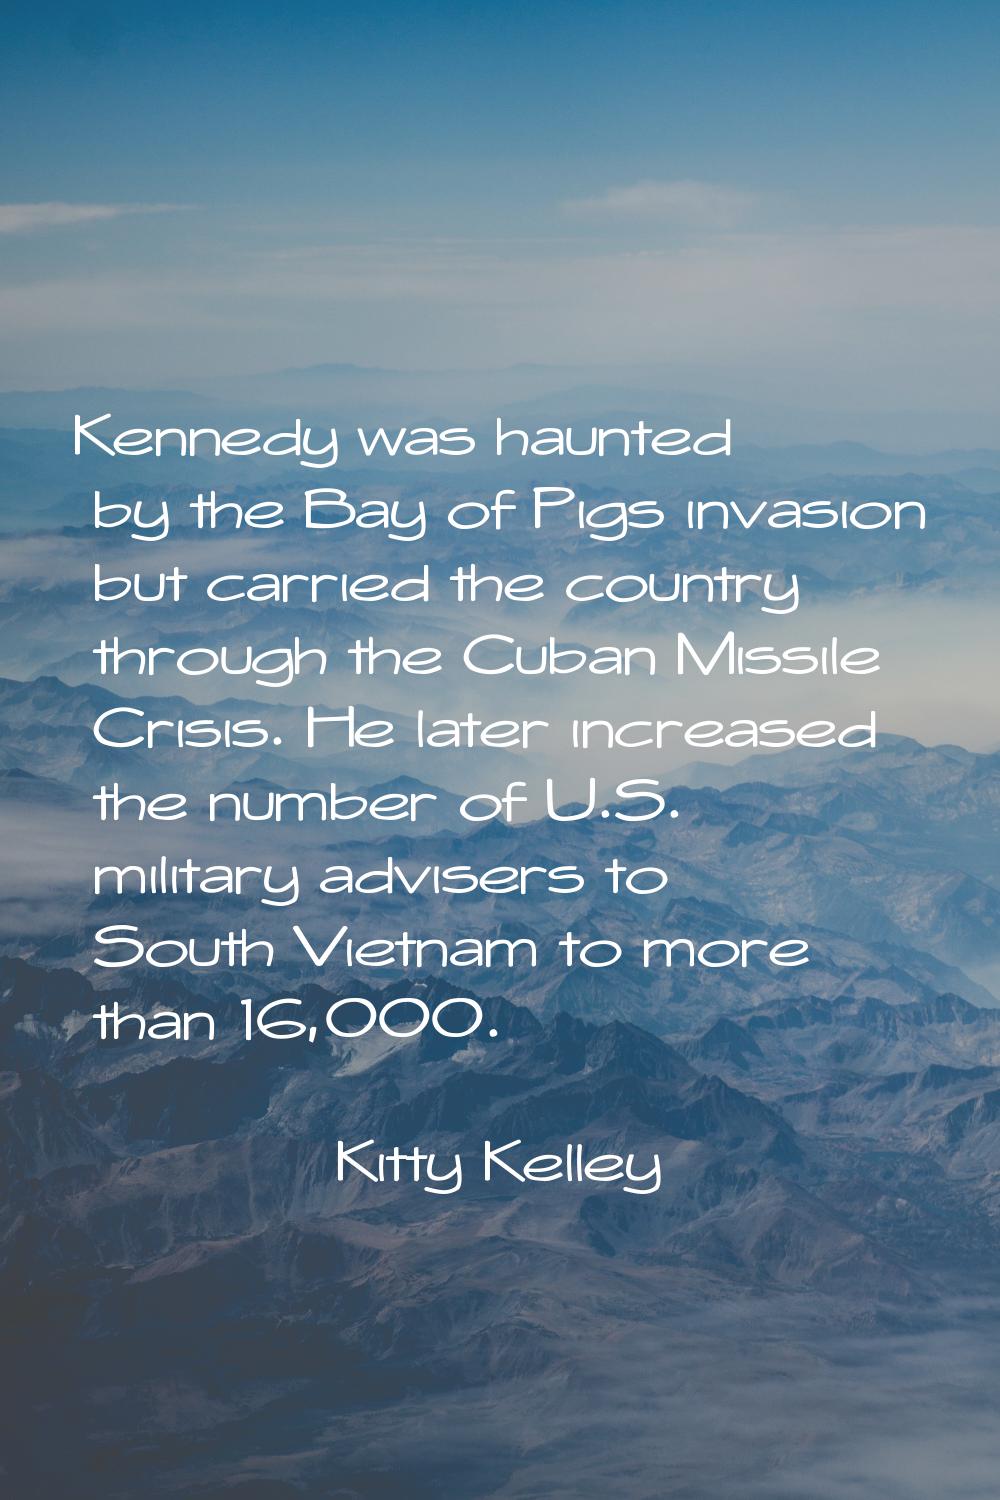 Kennedy was haunted by the Bay of Pigs invasion but carried the country through the Cuban Missile C